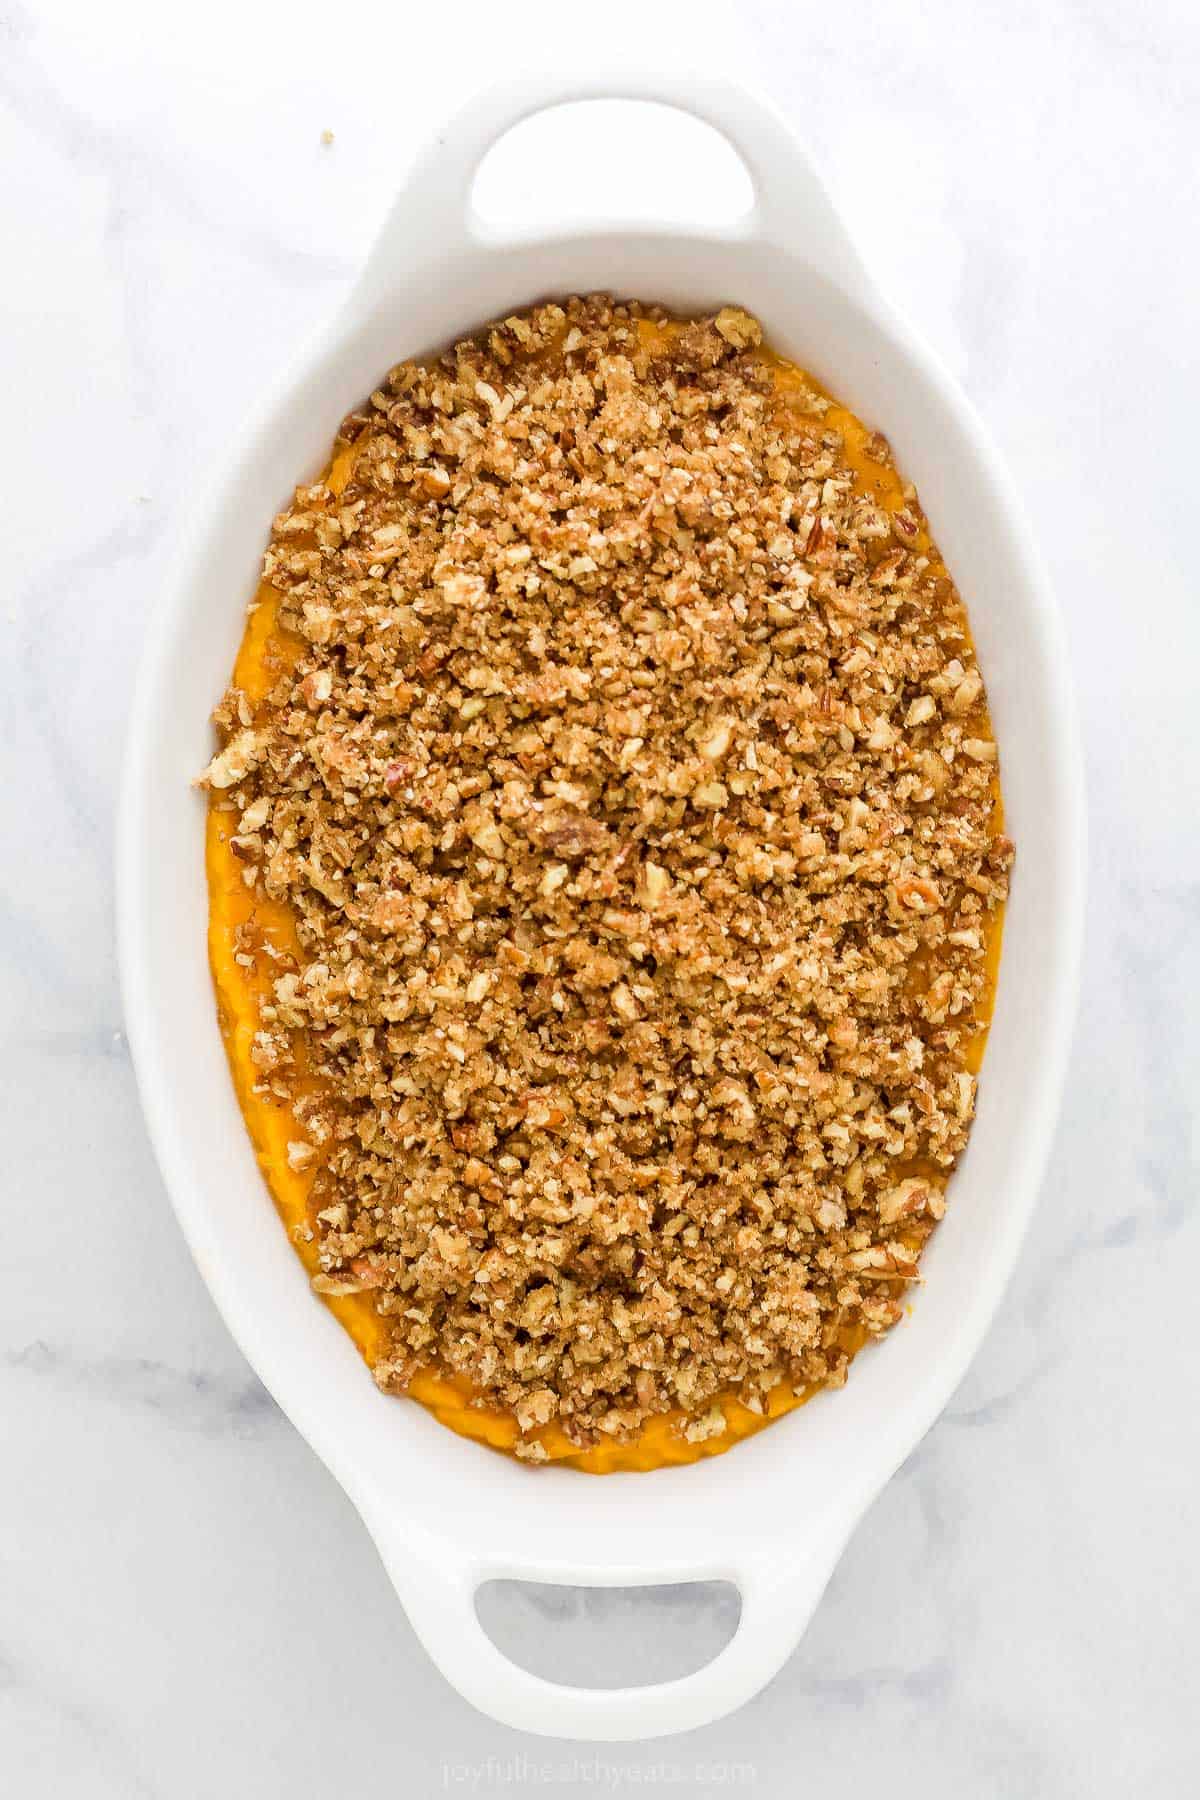 The prepared sweet potato filling in a casserole dish with the unbaked pecan streusel on top